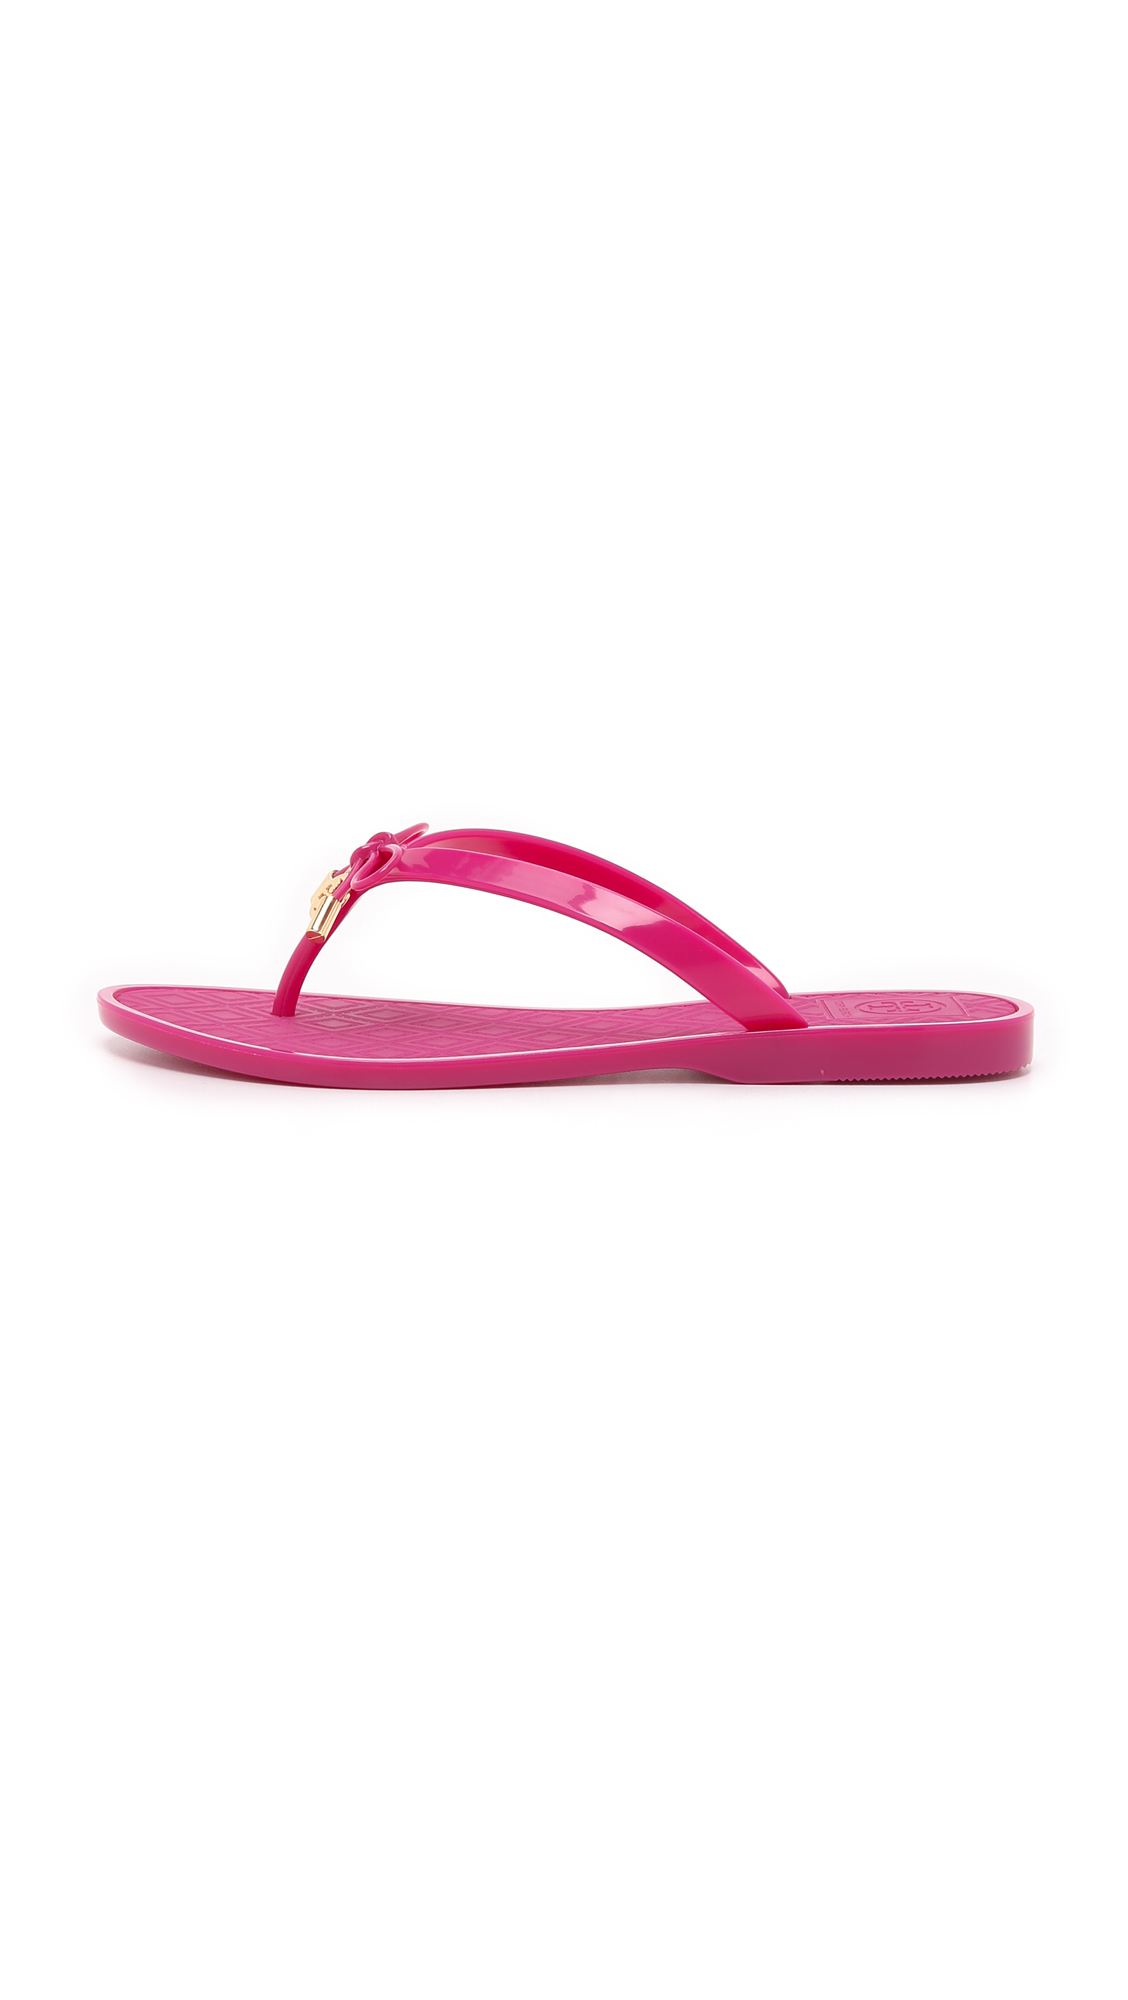 Lyst - Tory Burch Jelly Bow Thong Sandals in Pink